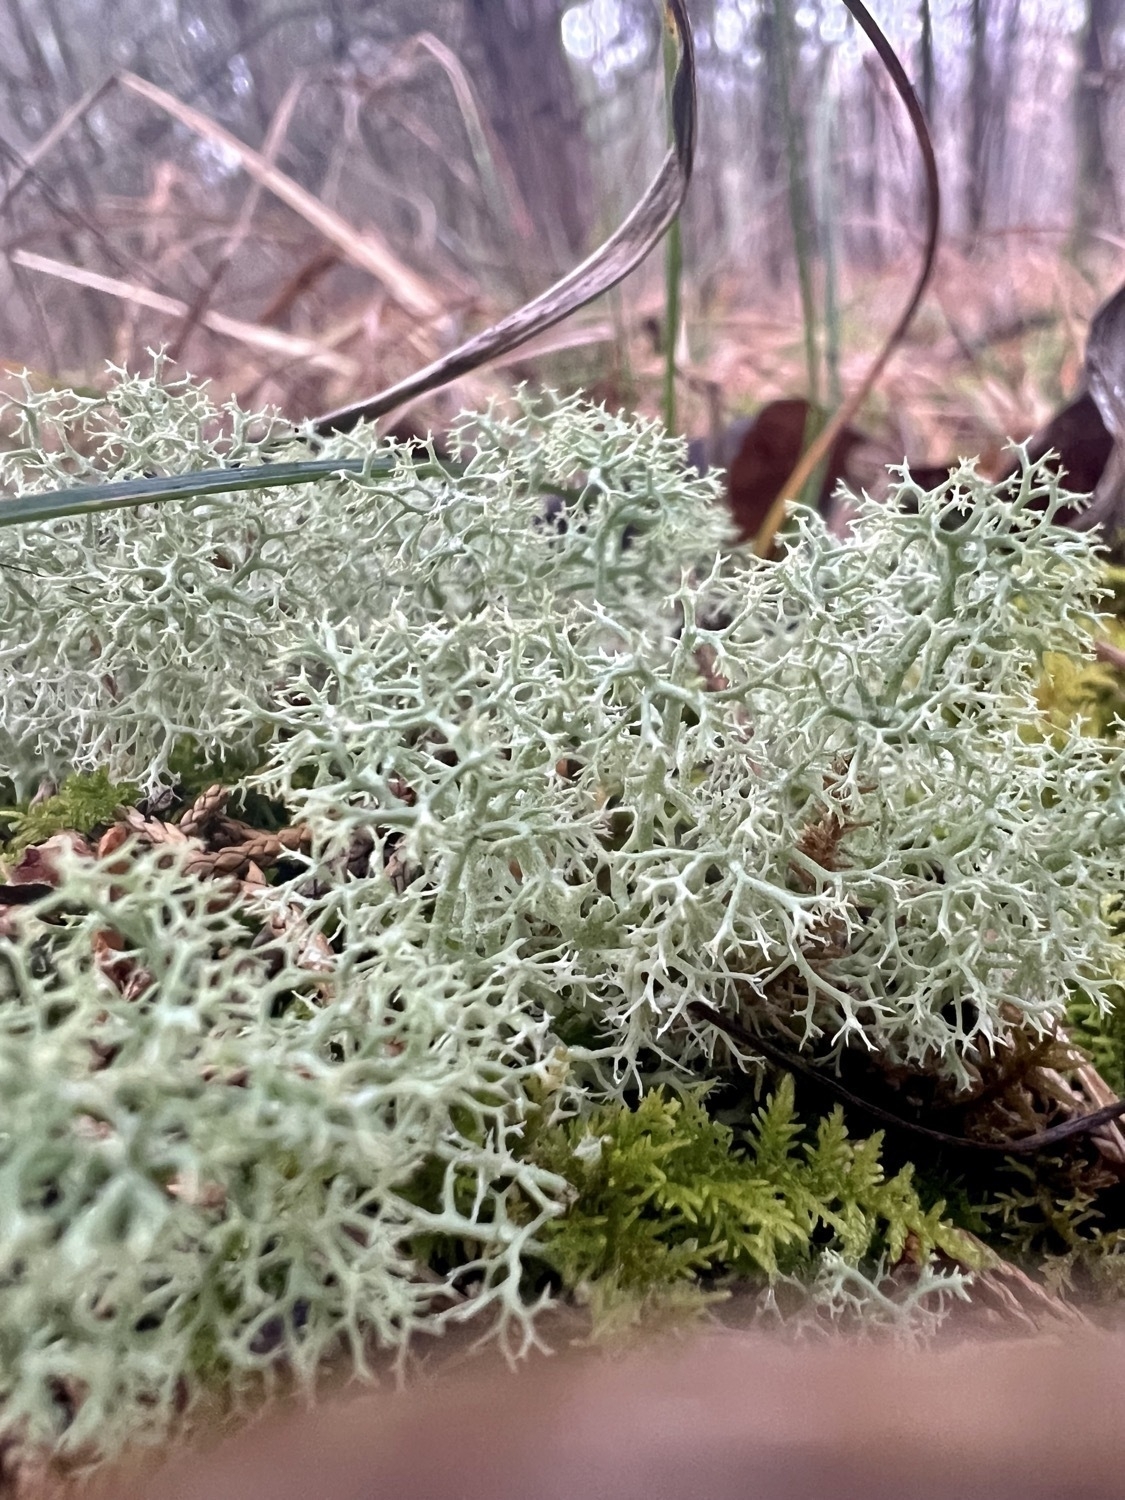 pale green lichen with many very tiny branches that looks like a kind of sponge. The lichen grows atop a darker green patch of lush moss on the forest floor with a background of winter woodland